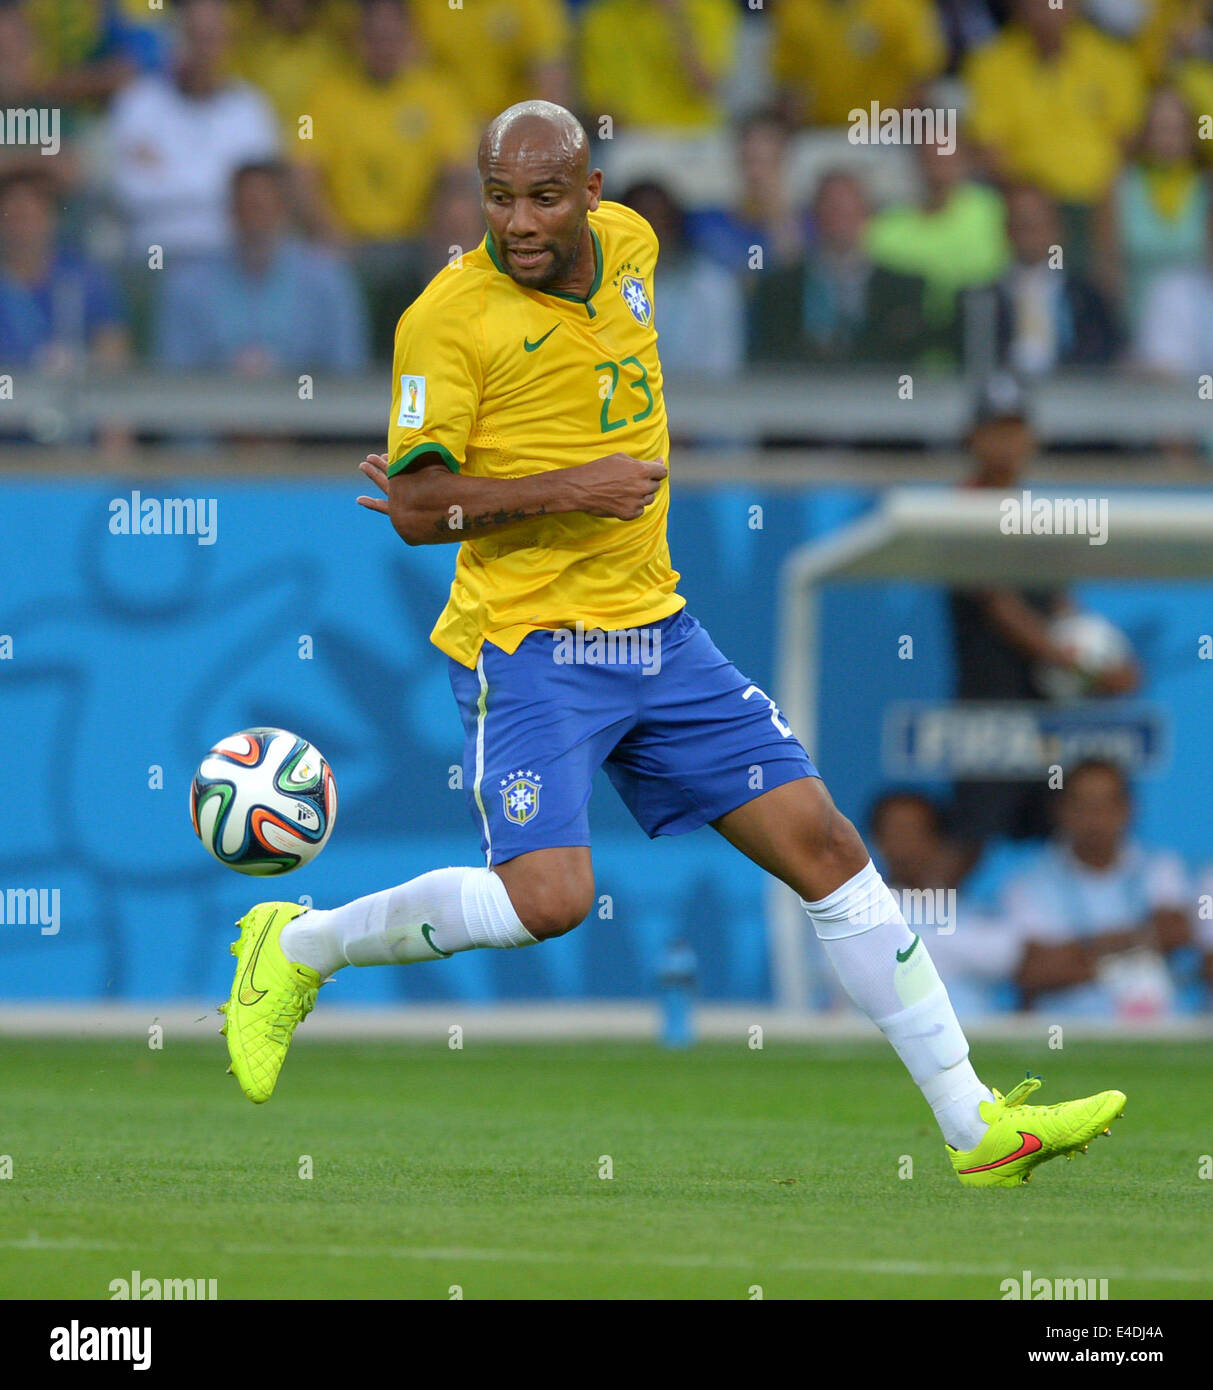 Belo Horizonte, Brazil. 08th July, 2014. Brazil's Maicon controls the ball during the FIFA World Cup 2014 semi-final soccer match between Brazil and Germany at Estadio Mineirao in Belo Horizonte, Brazil, 08 July 2014. Photo: Thomas Eisenhuth/dpa/Alamy Live News Stock Photo